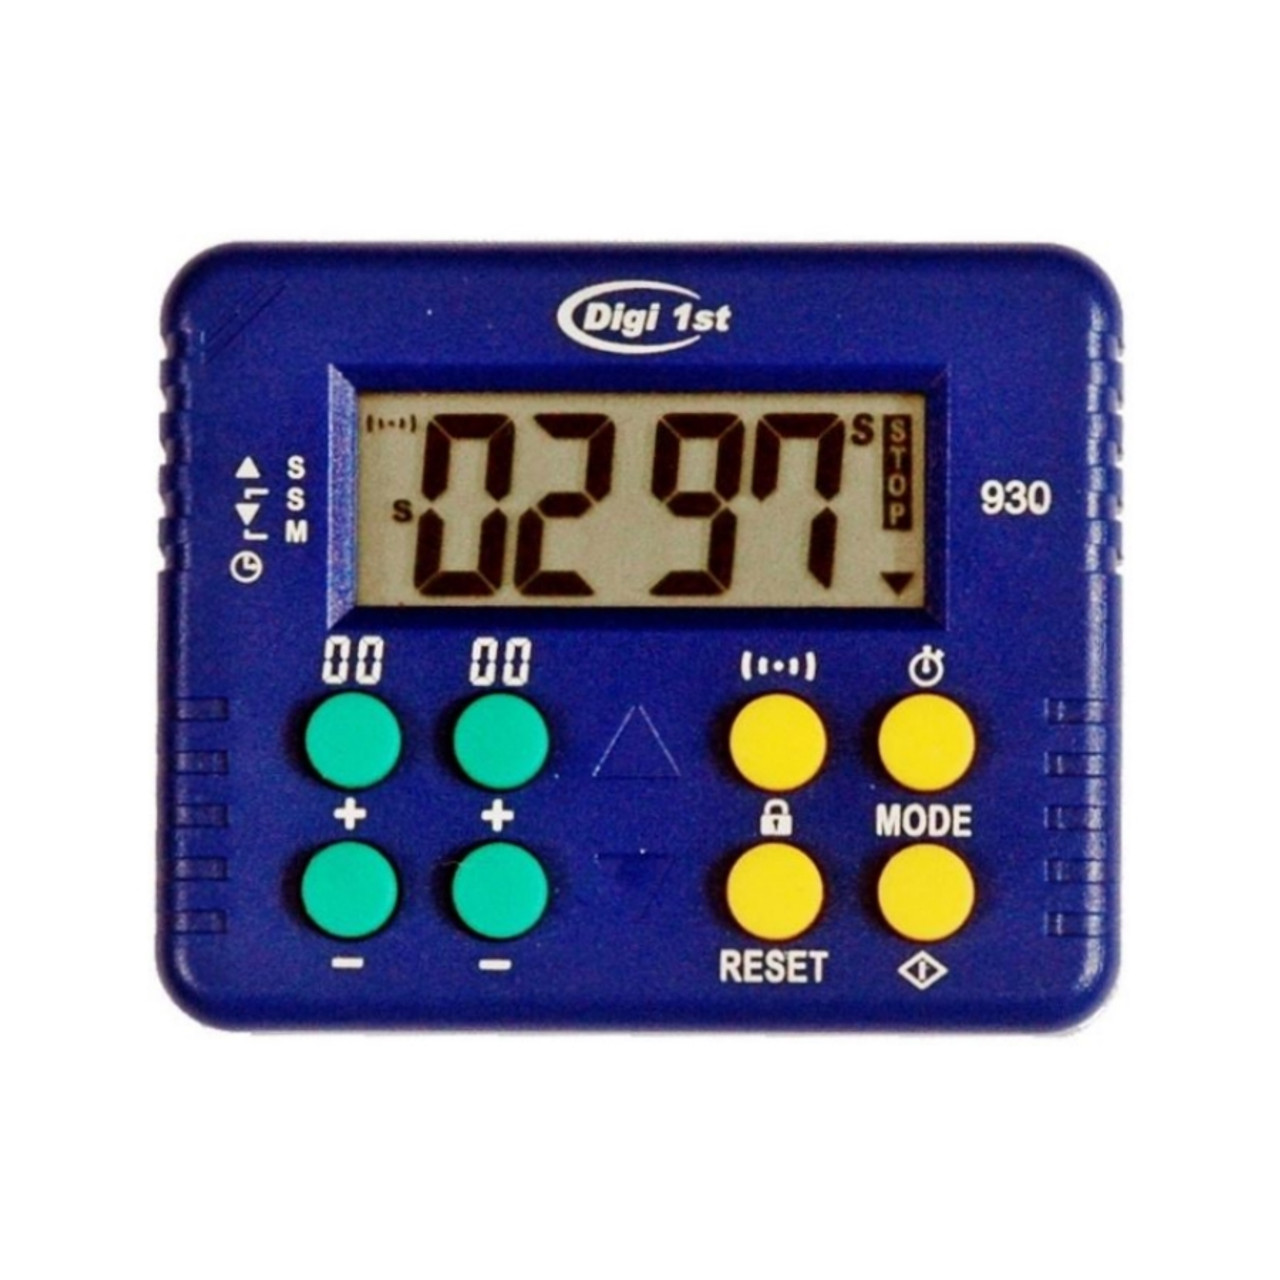 Digi 1st T-930 9999 Minute/Second Countdown & Count Up Timer